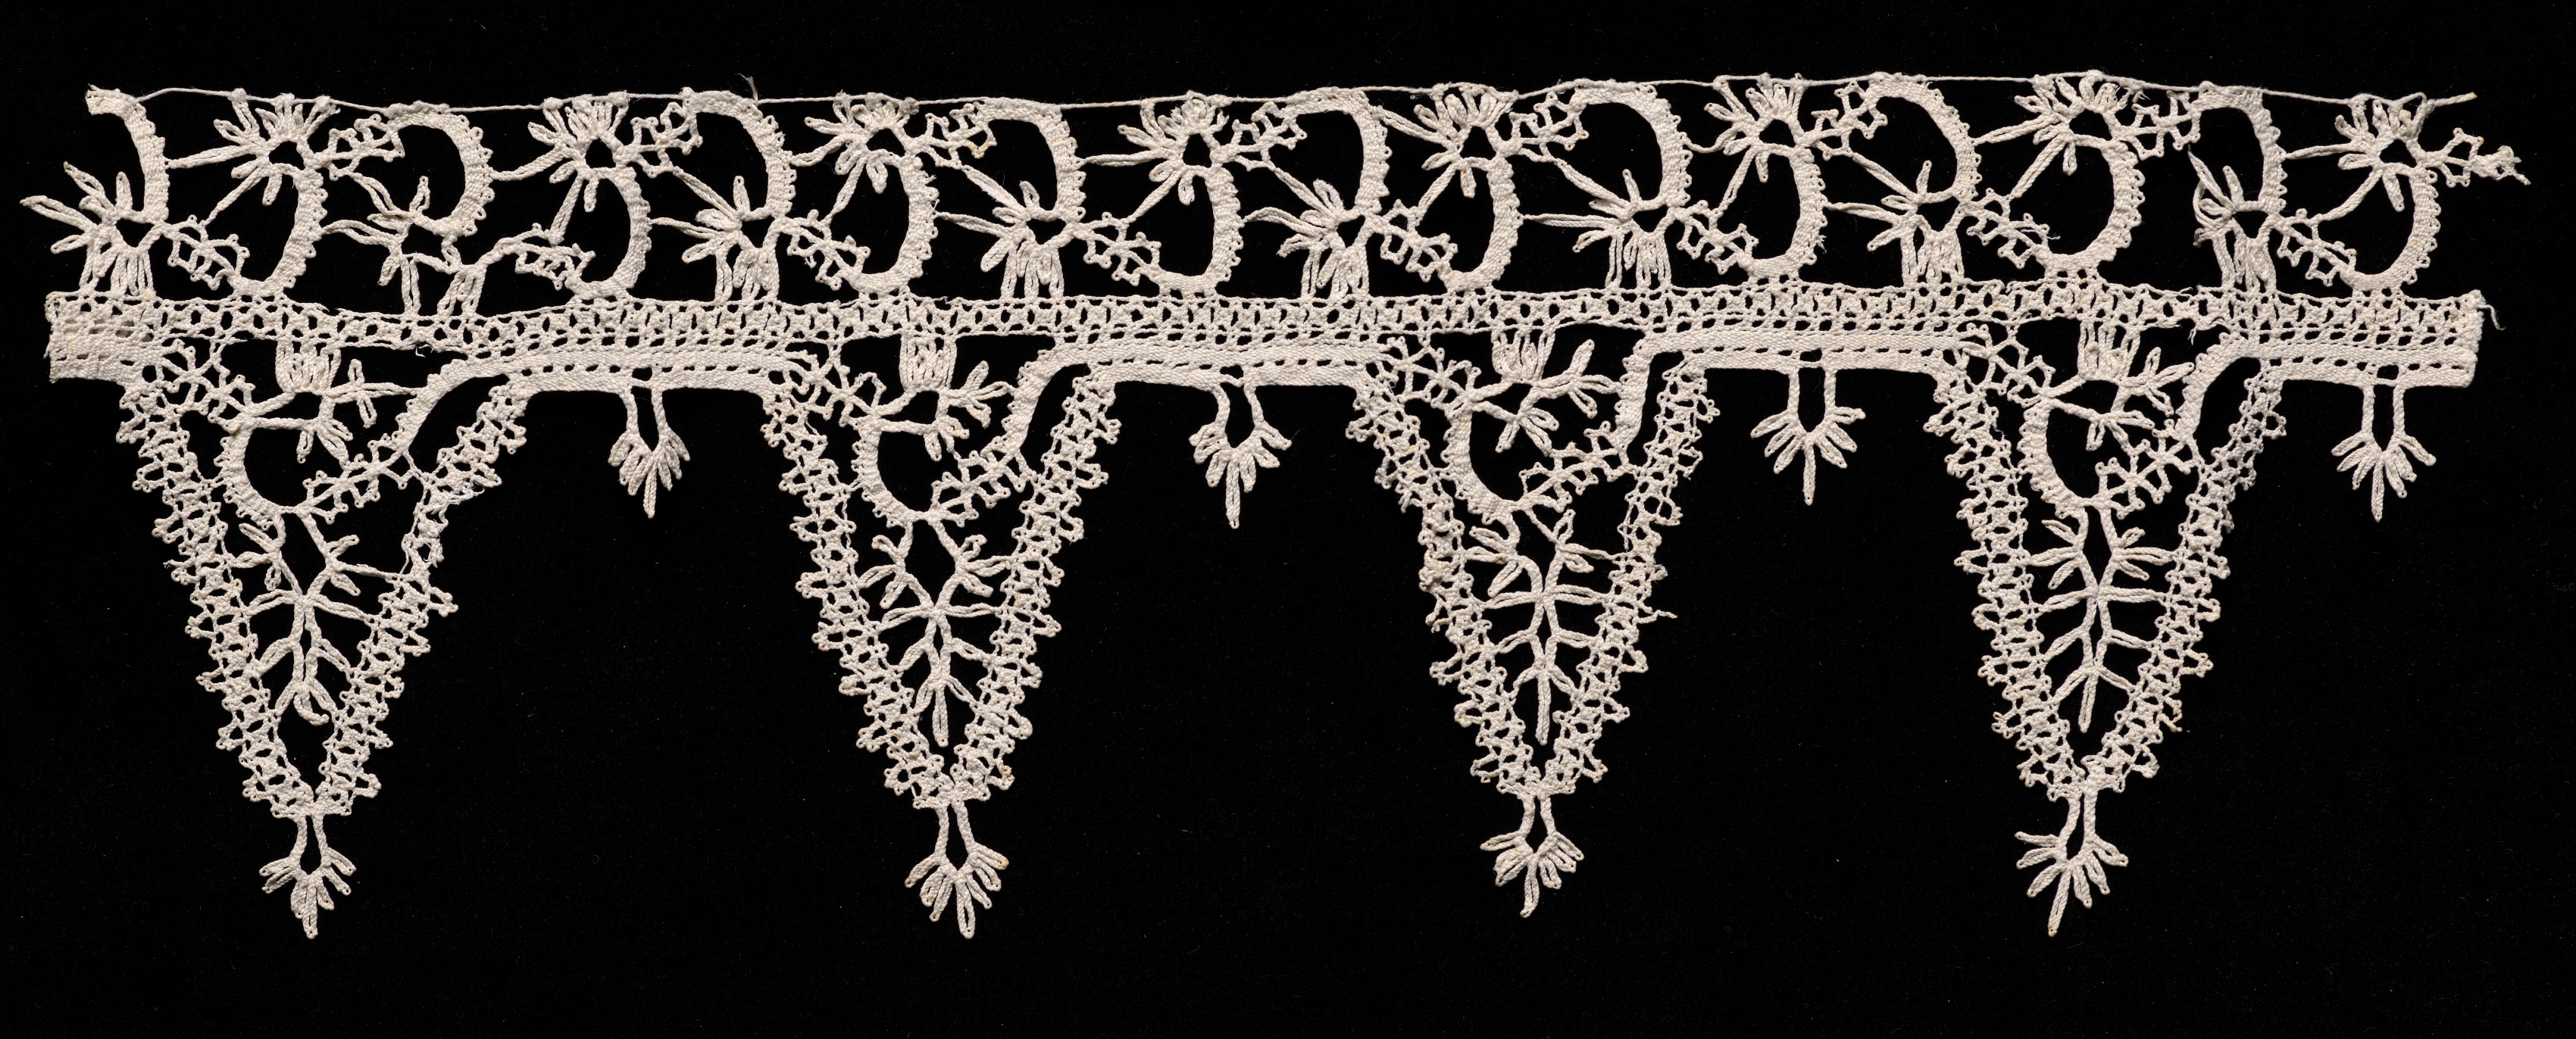 Bobbin Lace Insertion and Edging of Points